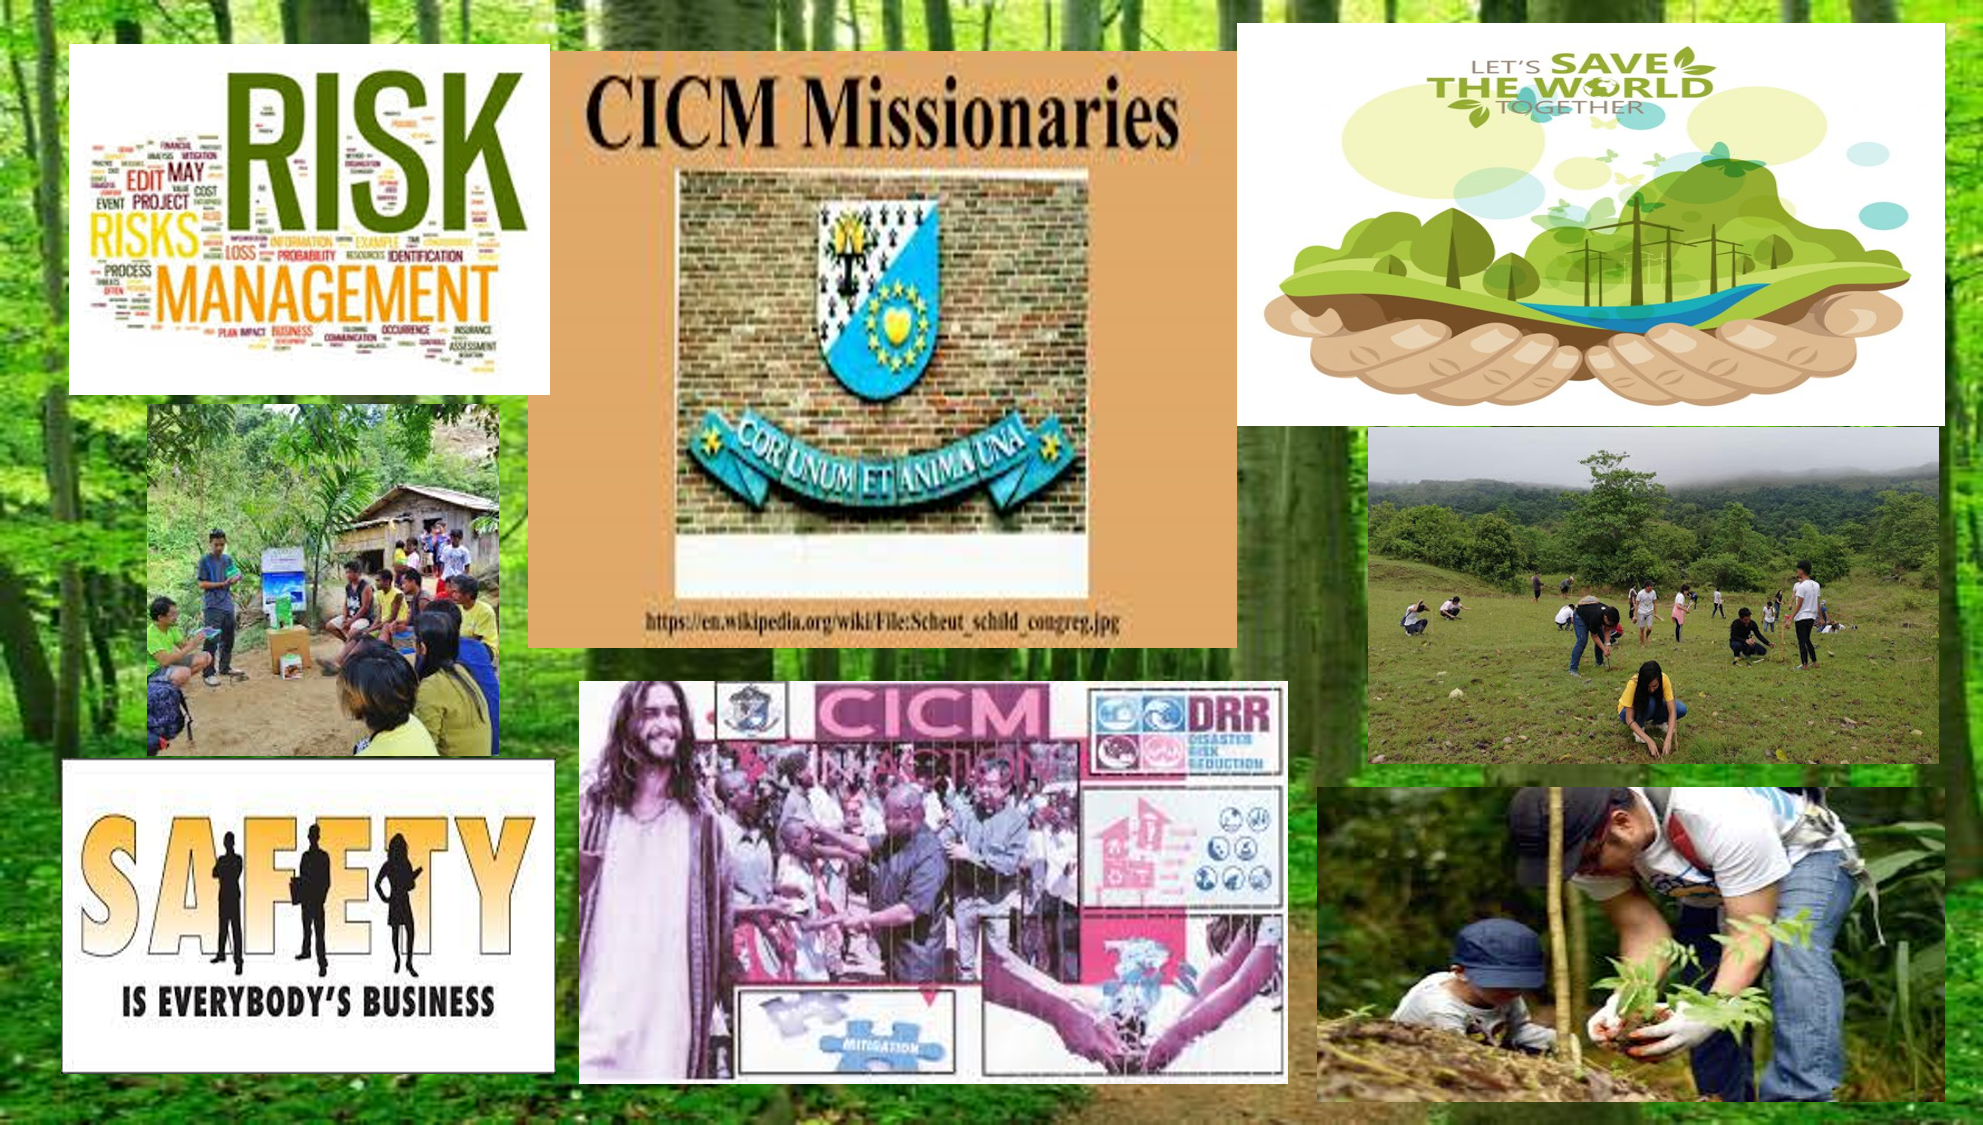 CICM in Action: Justice, Peace and Integrity of Creation; Indigenous Peoples; Interreligious Dialogu